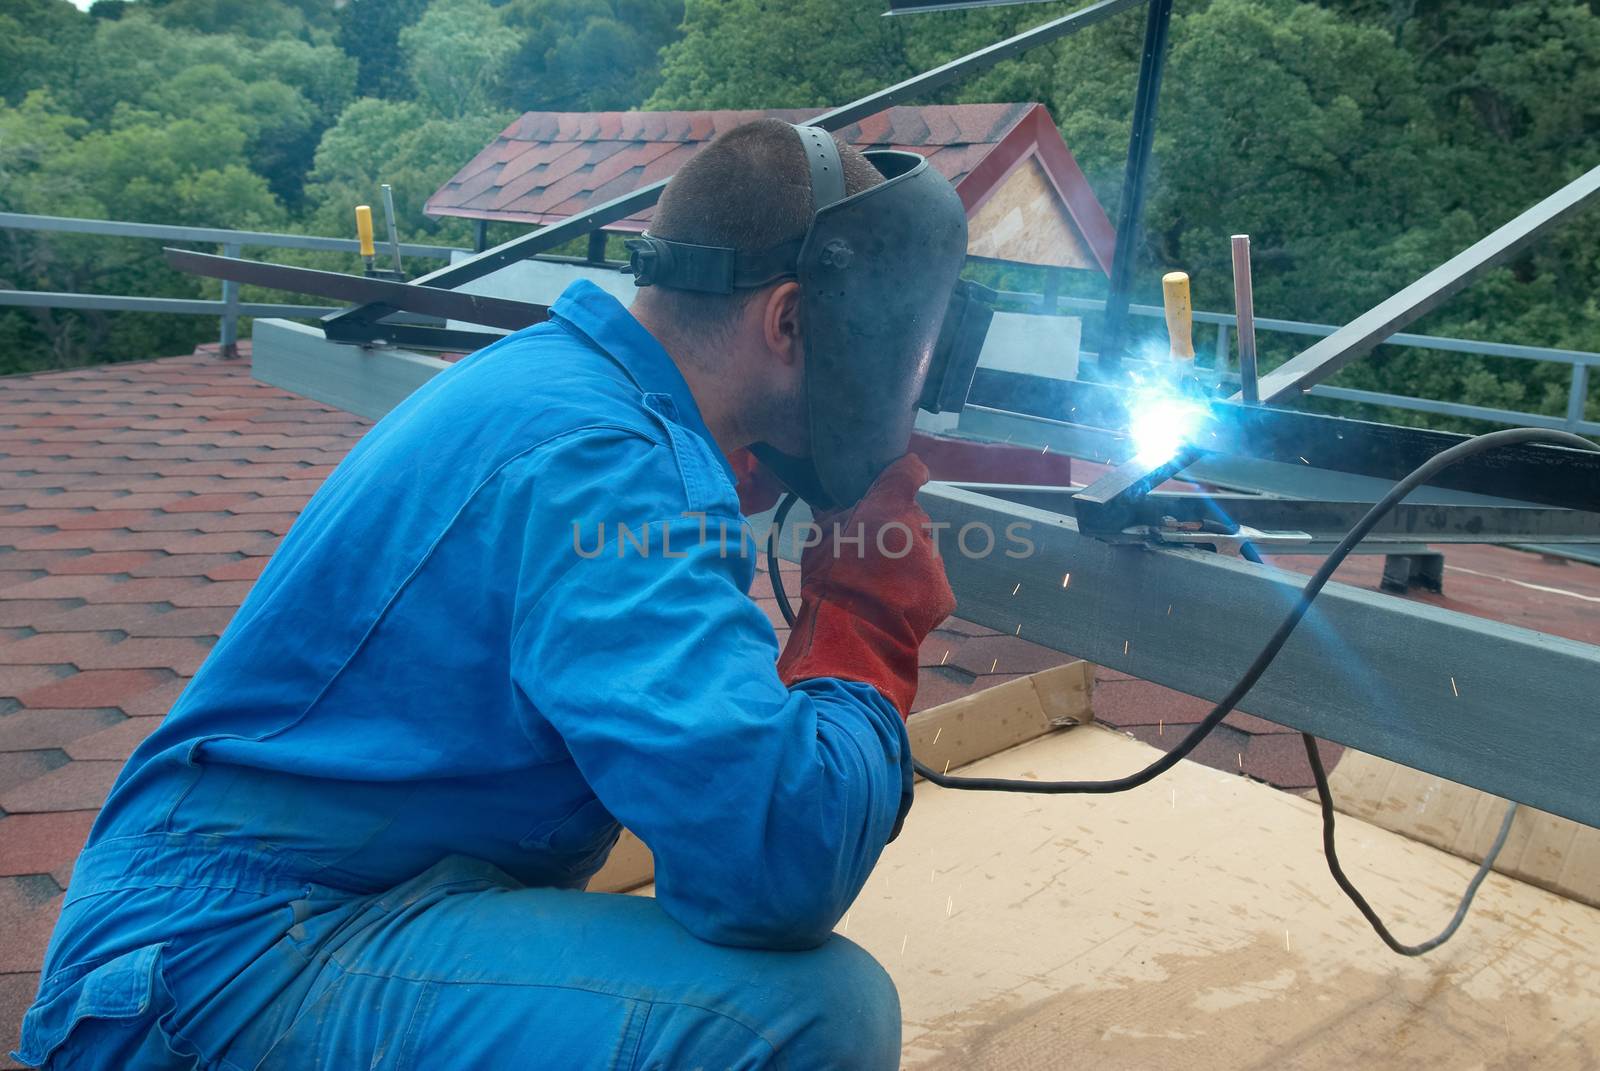 Welder at the factory working with metal construction